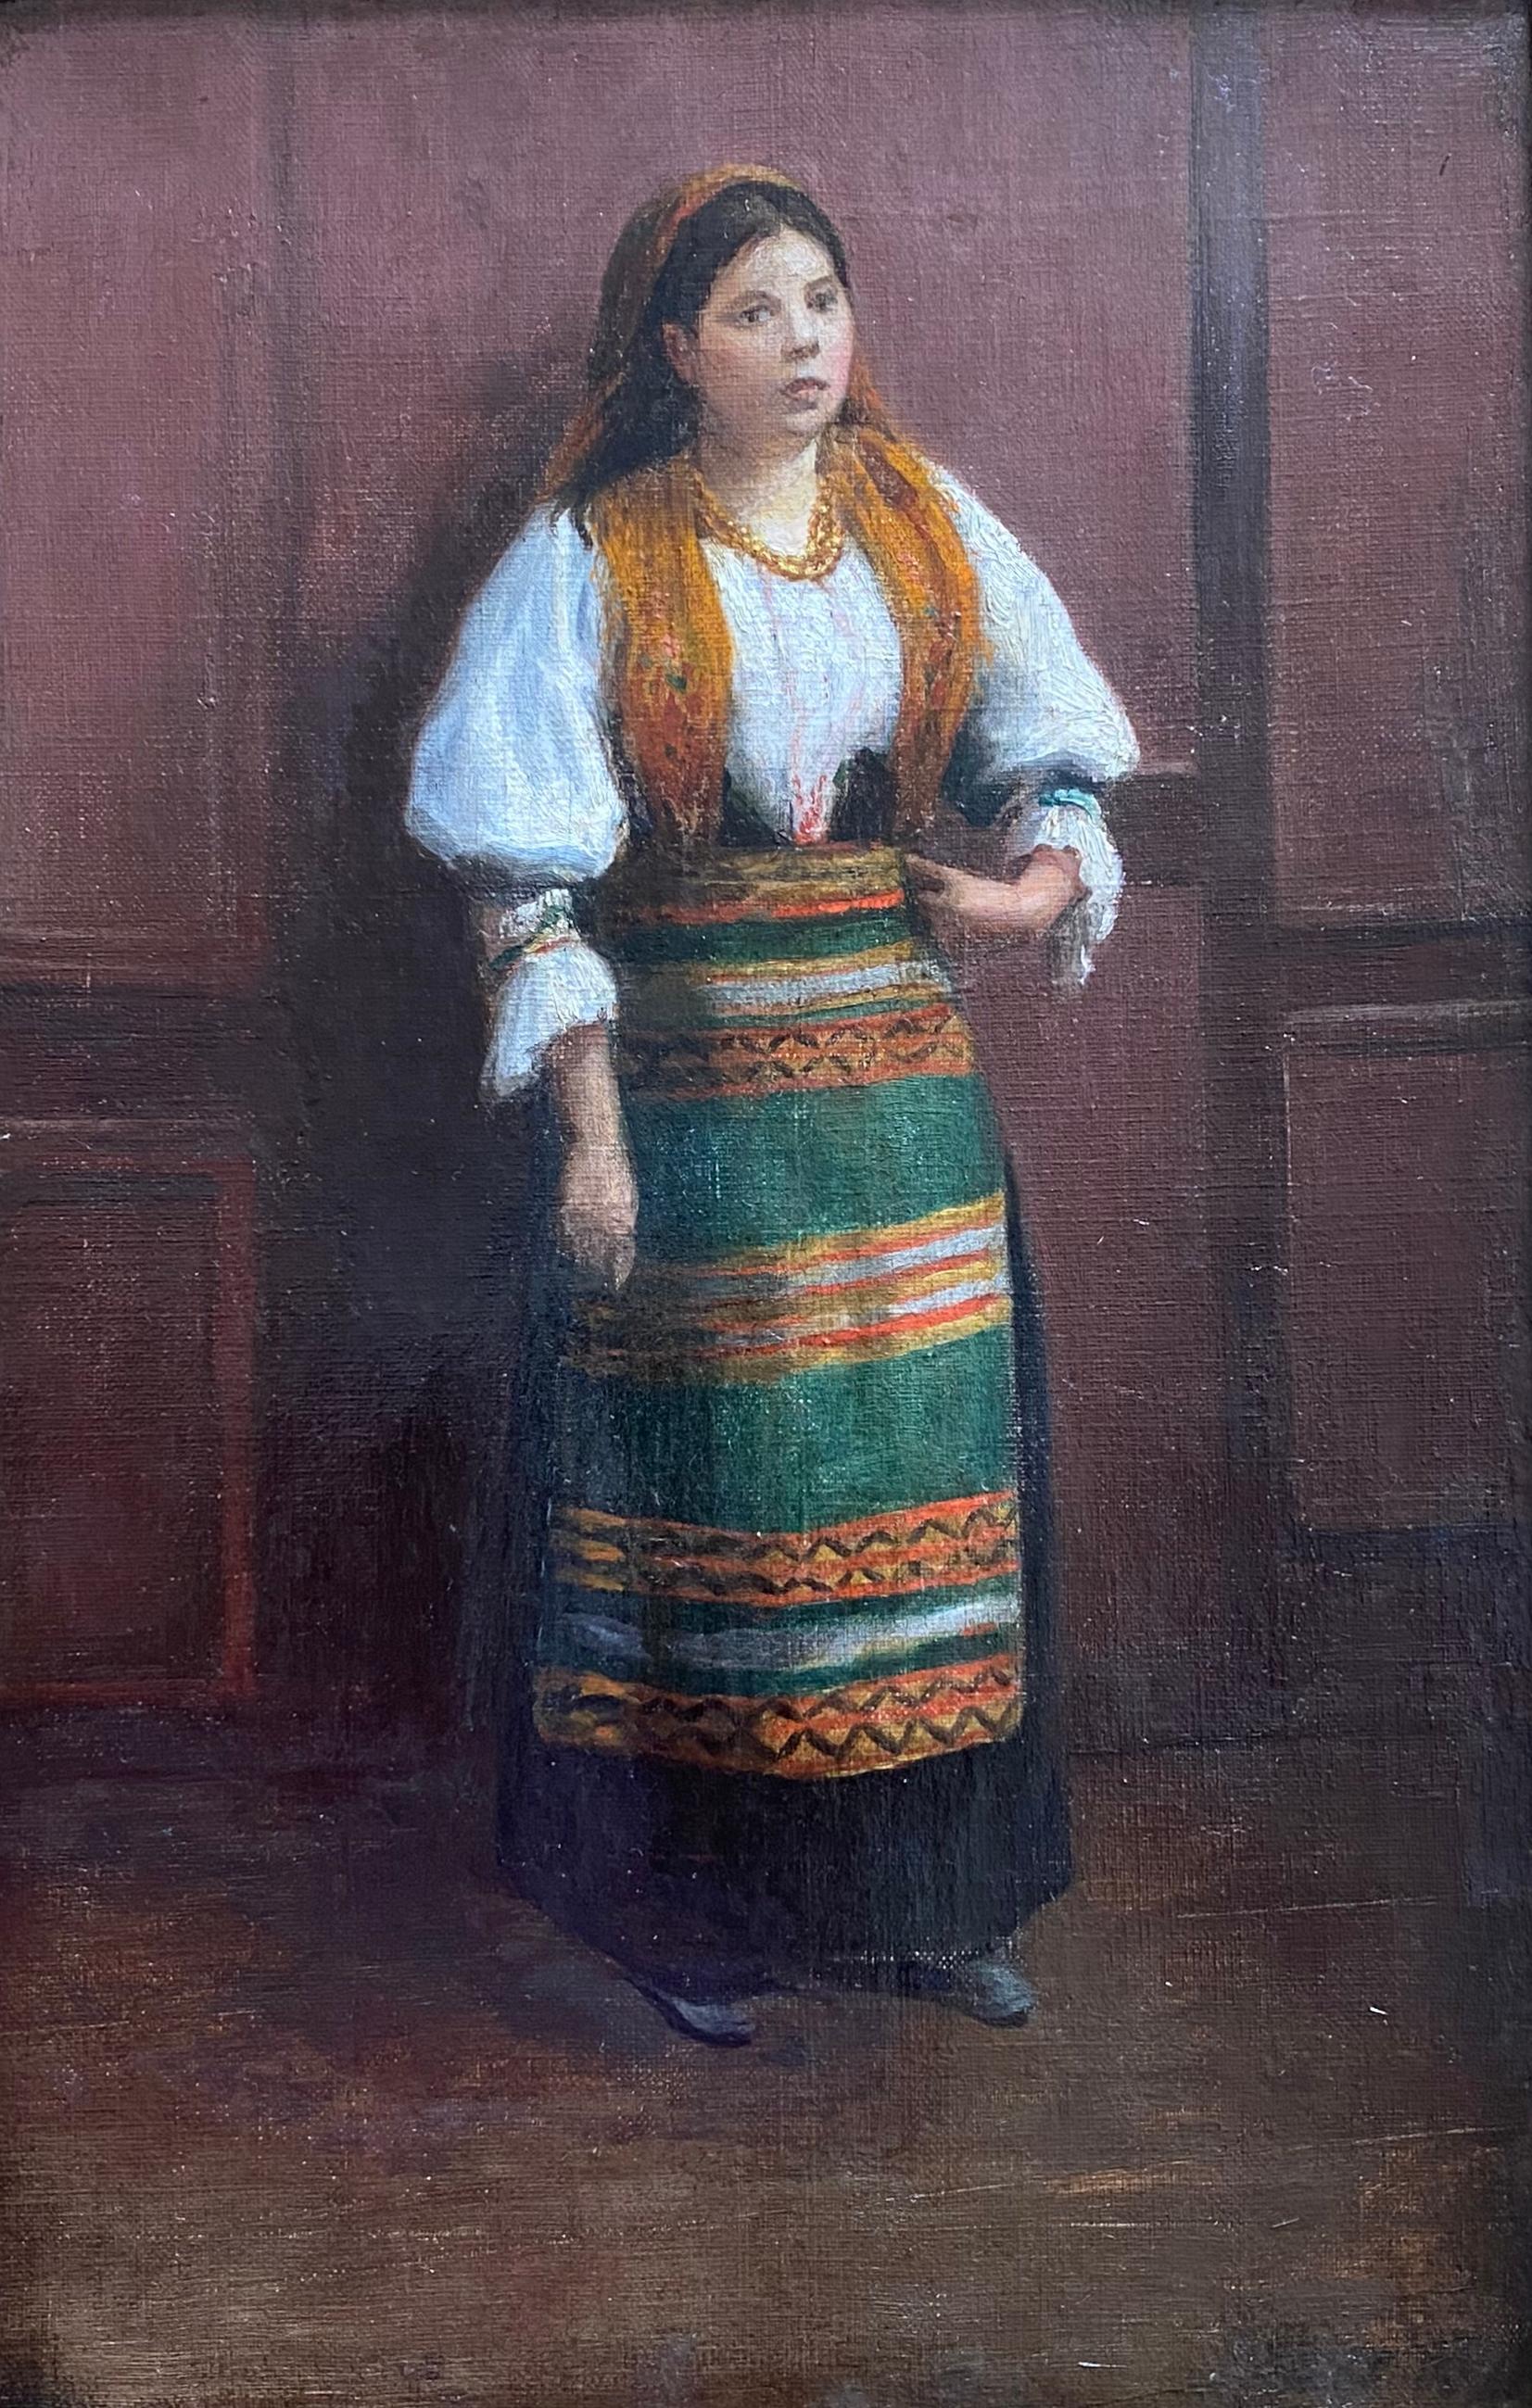 The first time model: the enigmatic young bohemian girl in traditional dress   - Painting de Unknown